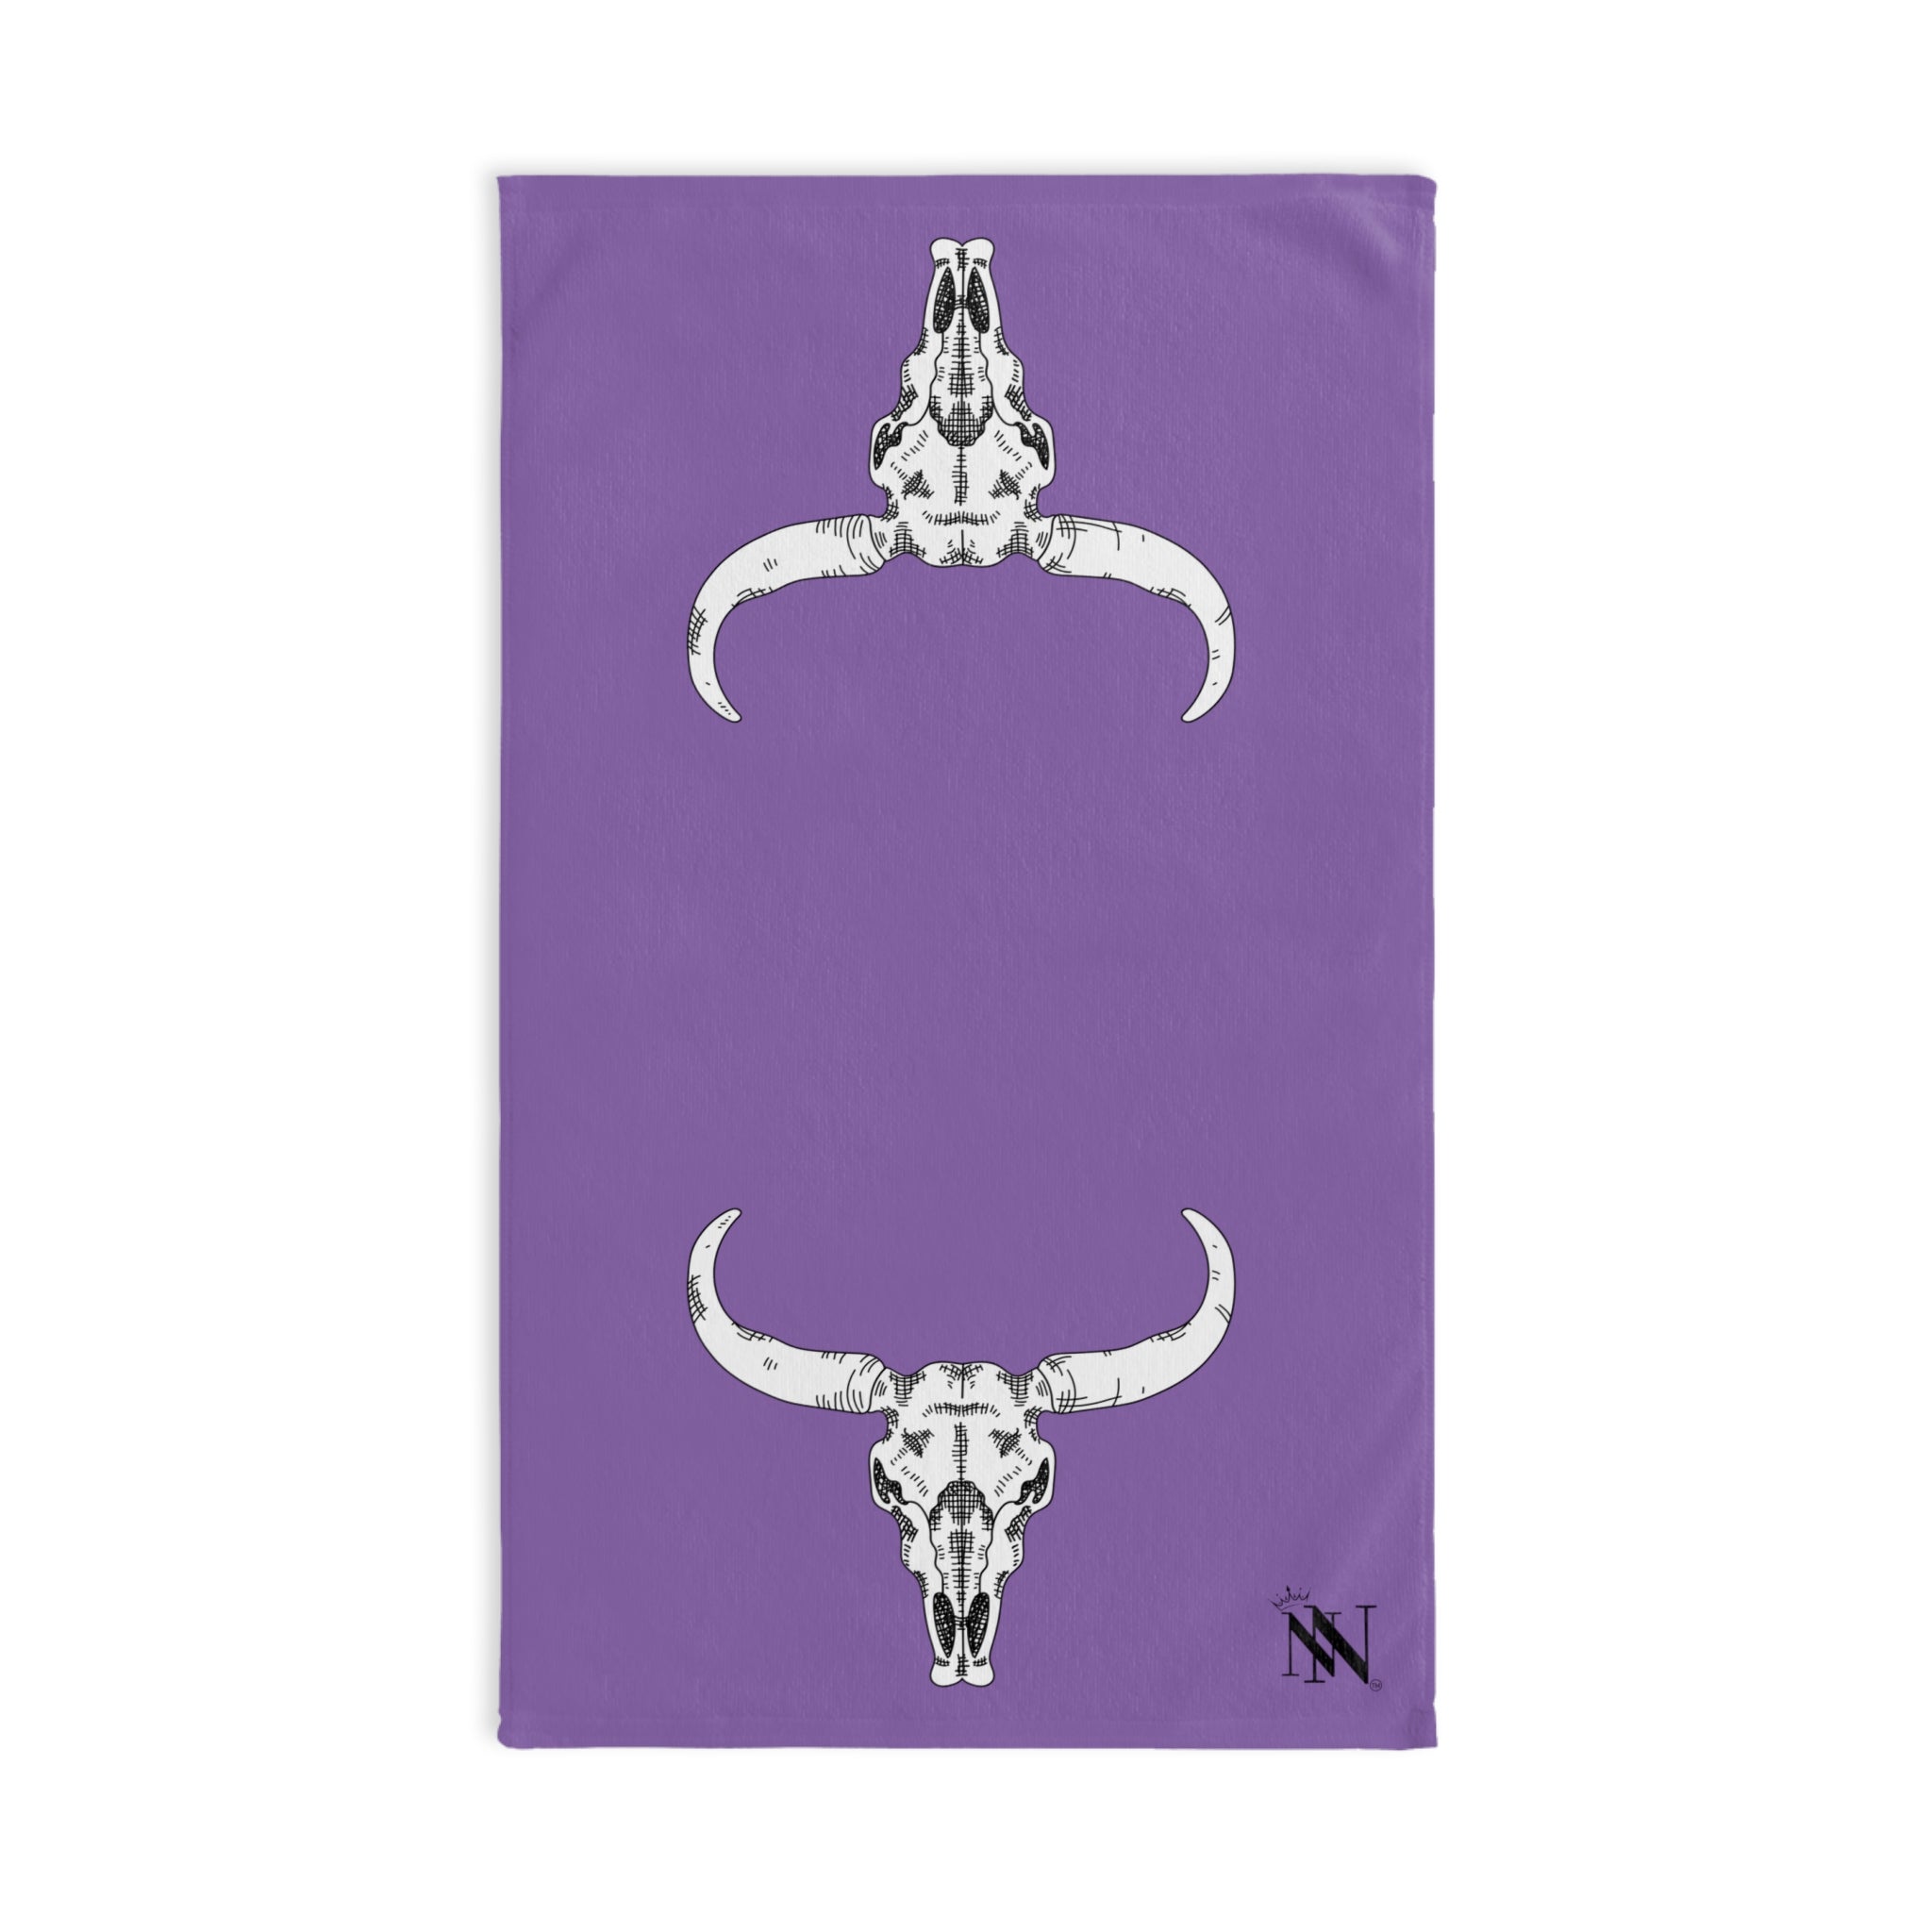 Black Mr Mrs Cow Skull Lavendar | Funny Gifts for Men - Gifts for Him - Birthday Gifts for Men, Him, Husband, Boyfriend, New Couple Gifts, Fathers & Valentines Day Gifts, Hand Towels NECTAR NAPKINS